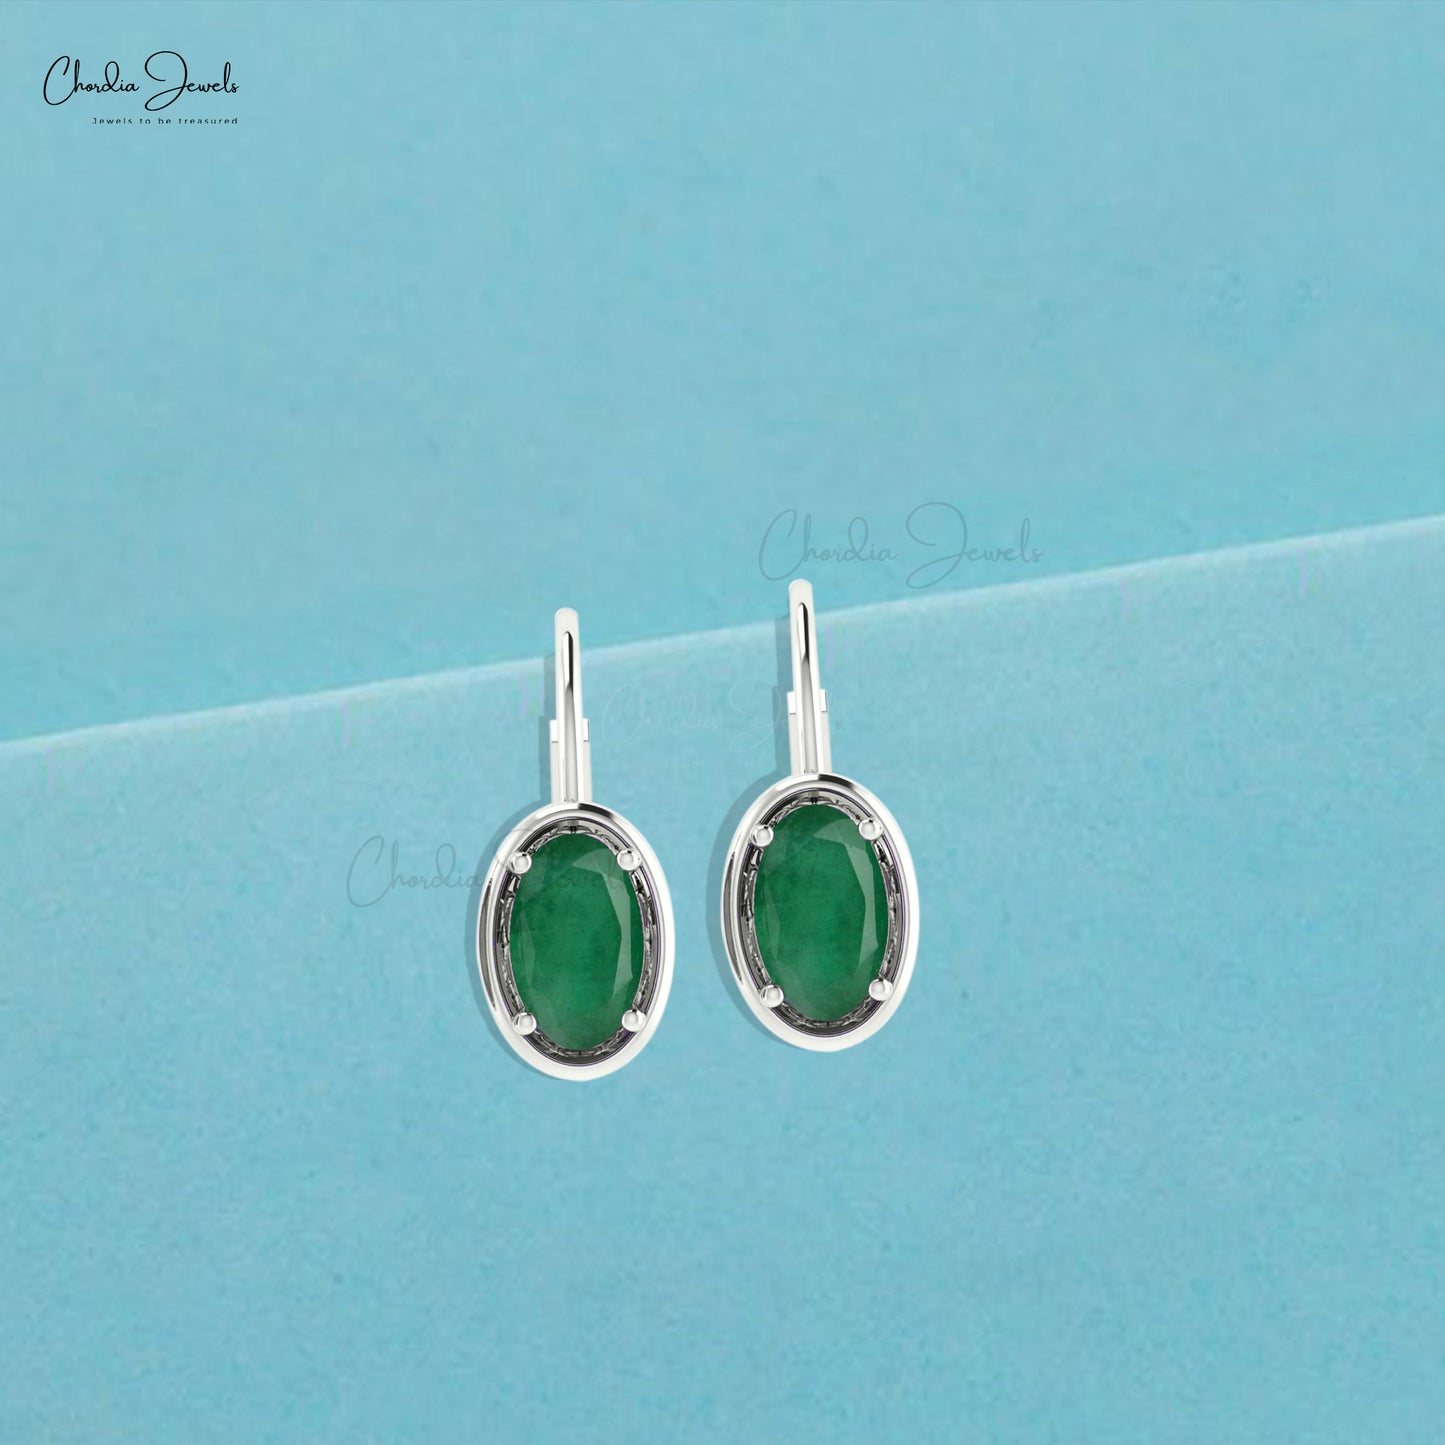 Transform your style with these emerald leverback earrings.